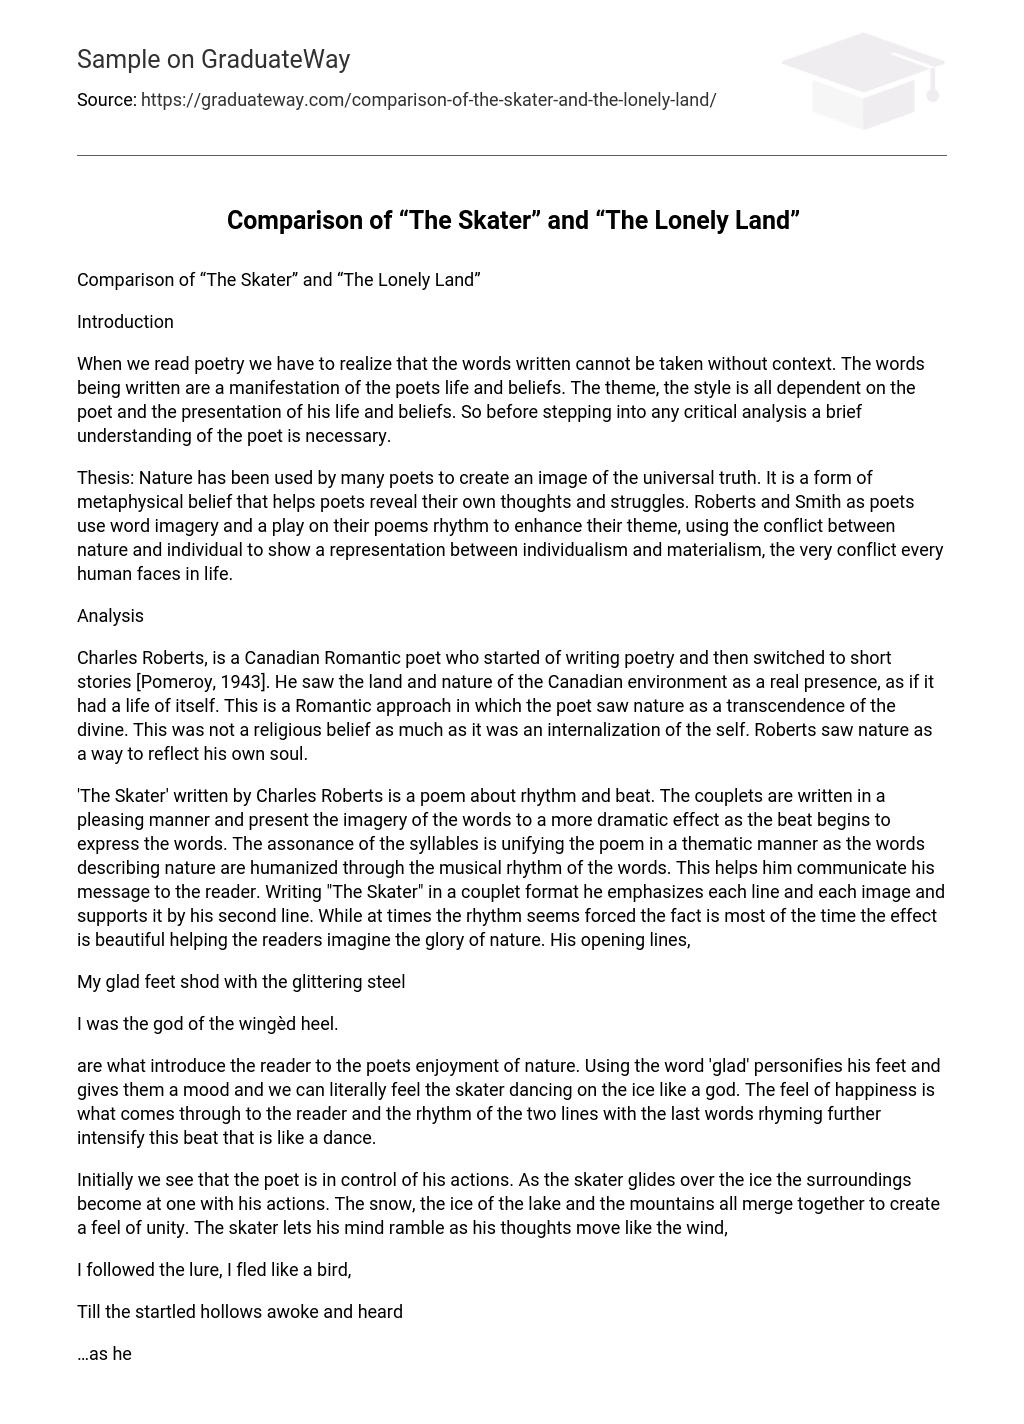 Comparison of “The Skater” and “The Lonely Land”